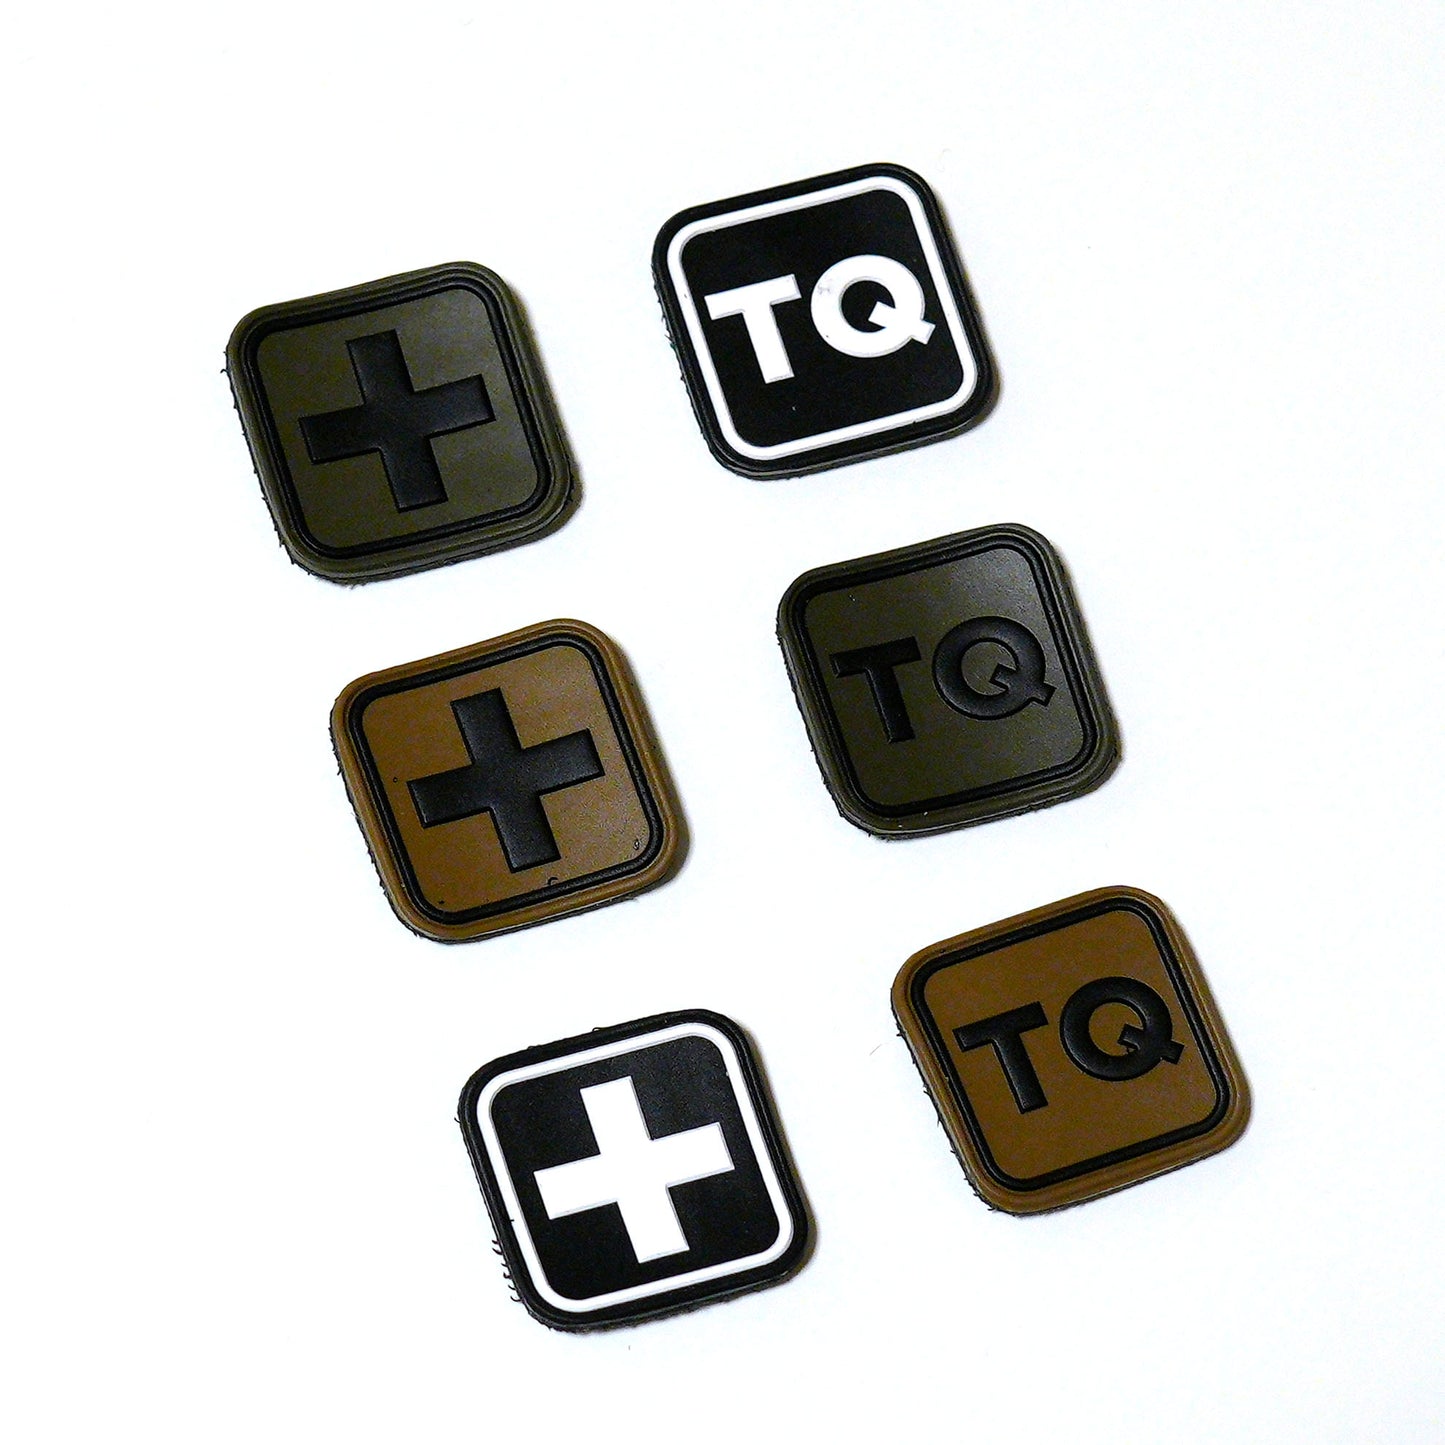 HSGI Patch 6 Pack TQ and Med Cross in all 3 Colors